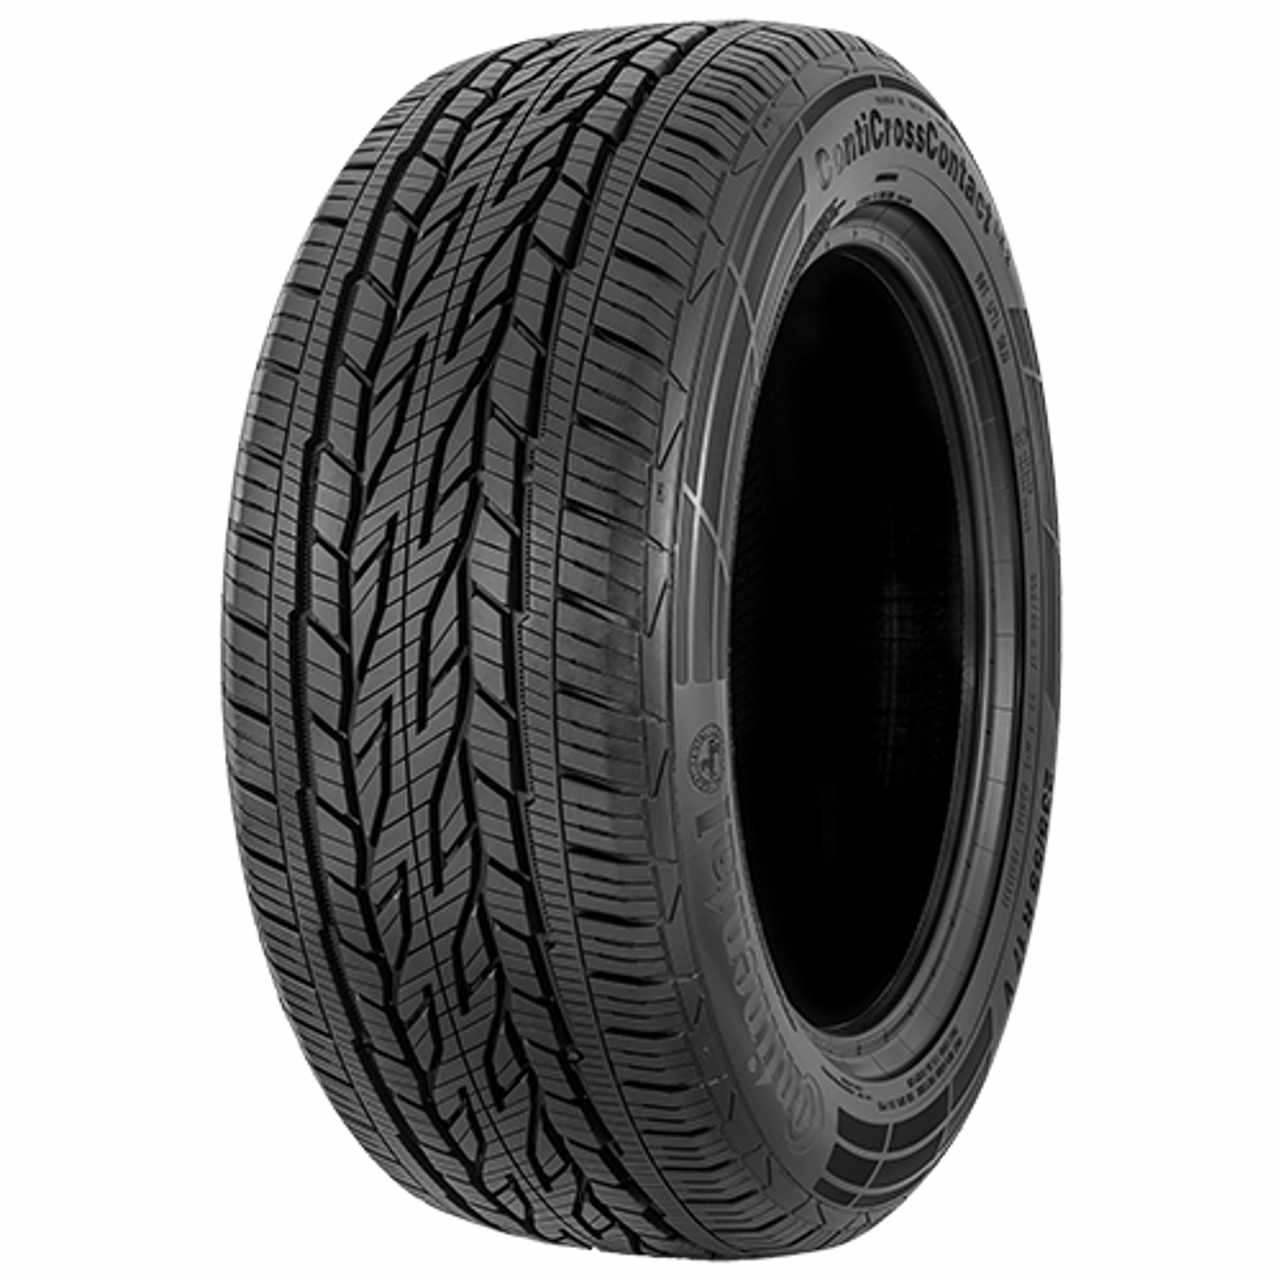 CONTINENTAL CONTICROSSCONTACT LX 2 (EVc) 225/55R18 98V FR BSW von Continental